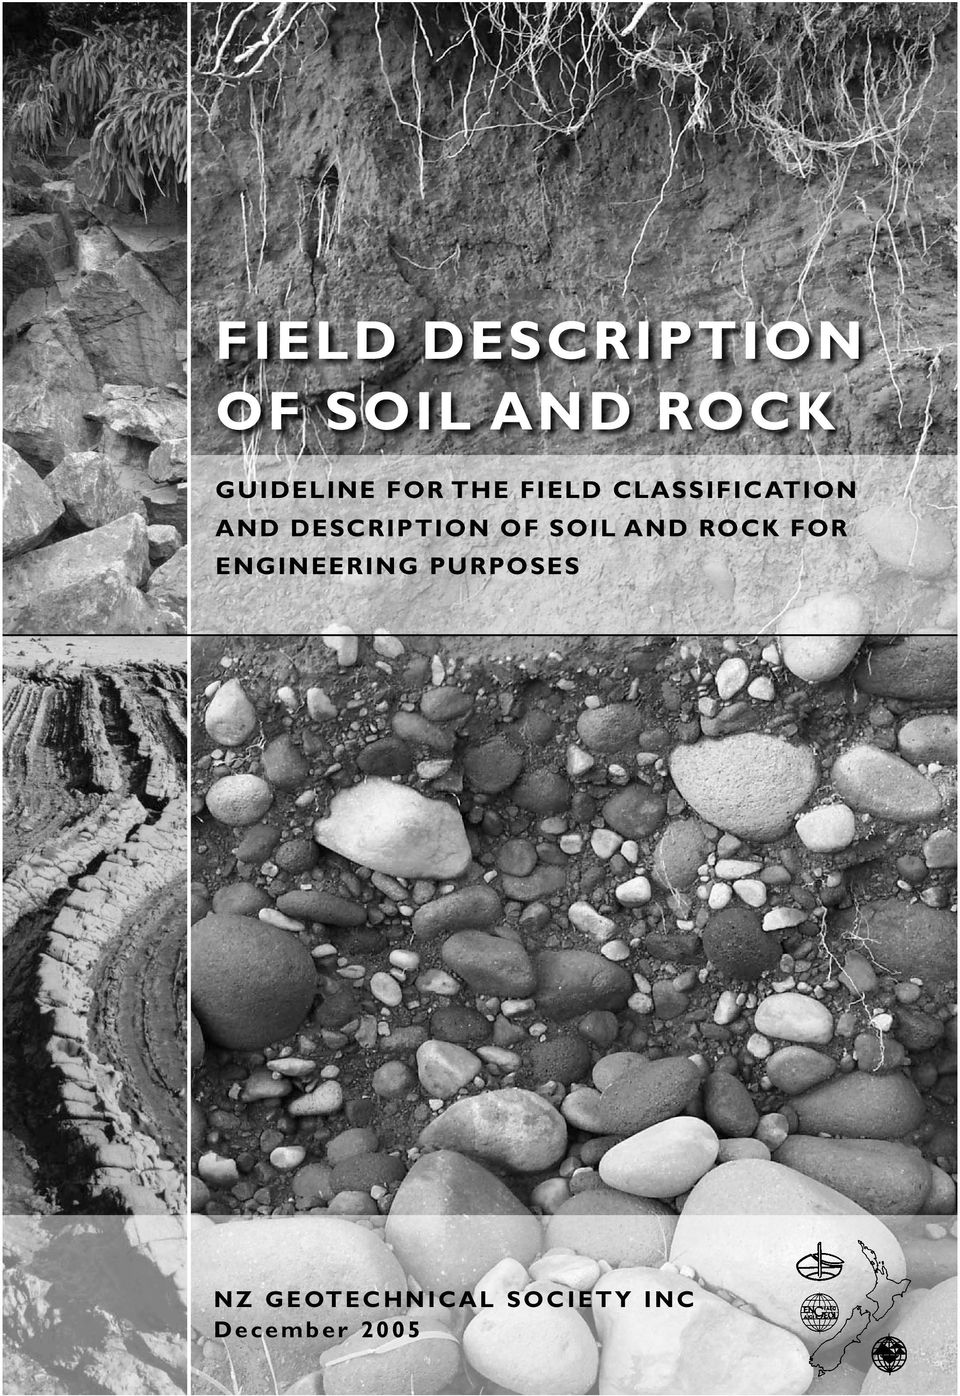 DESCRIPTION OF SOIL AND ROCK FOR